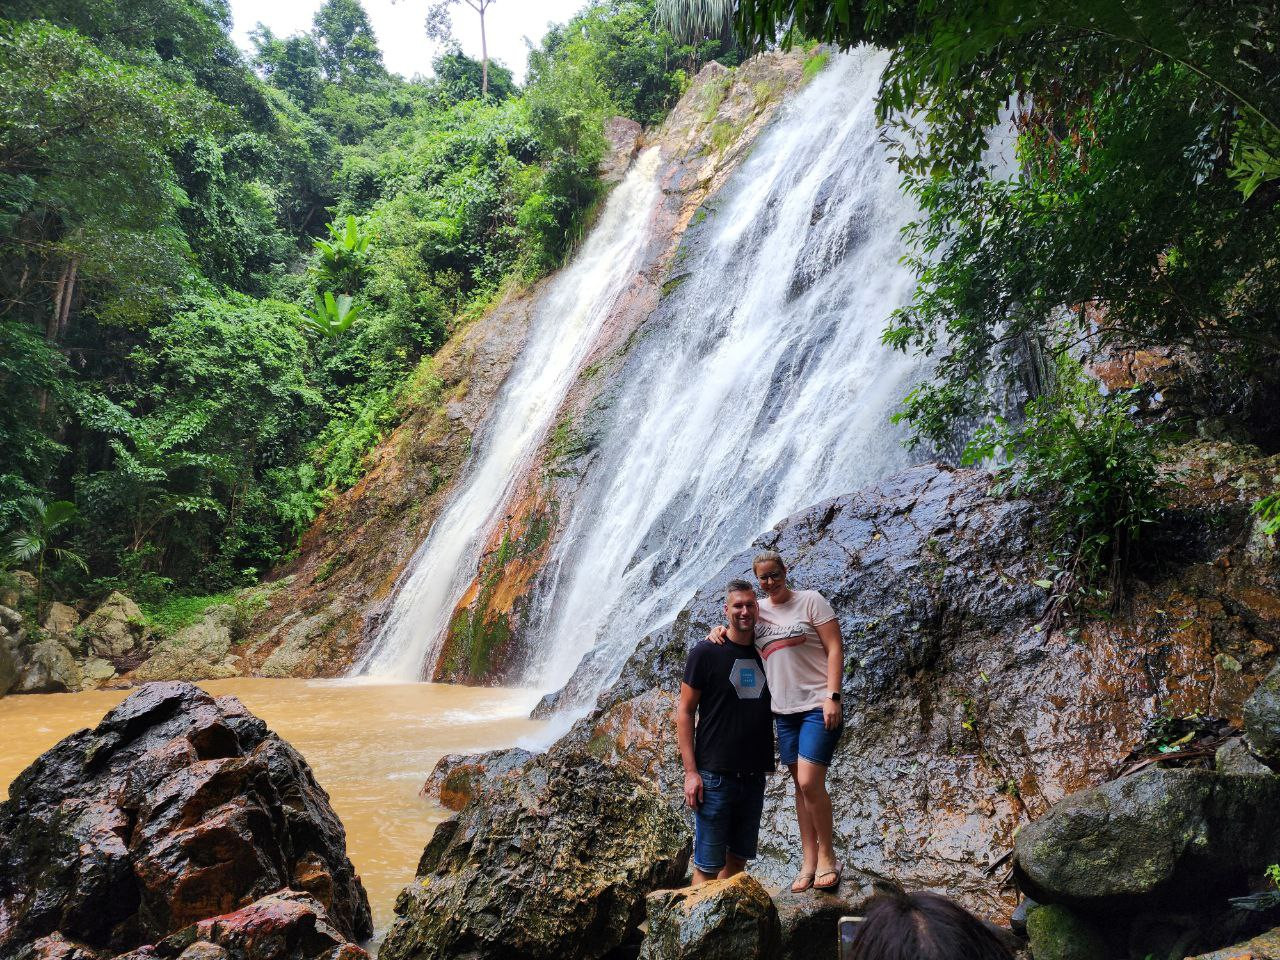 The Nuameng waterfall is a go to destination for tourists. – Pic by Shah Shamshiri